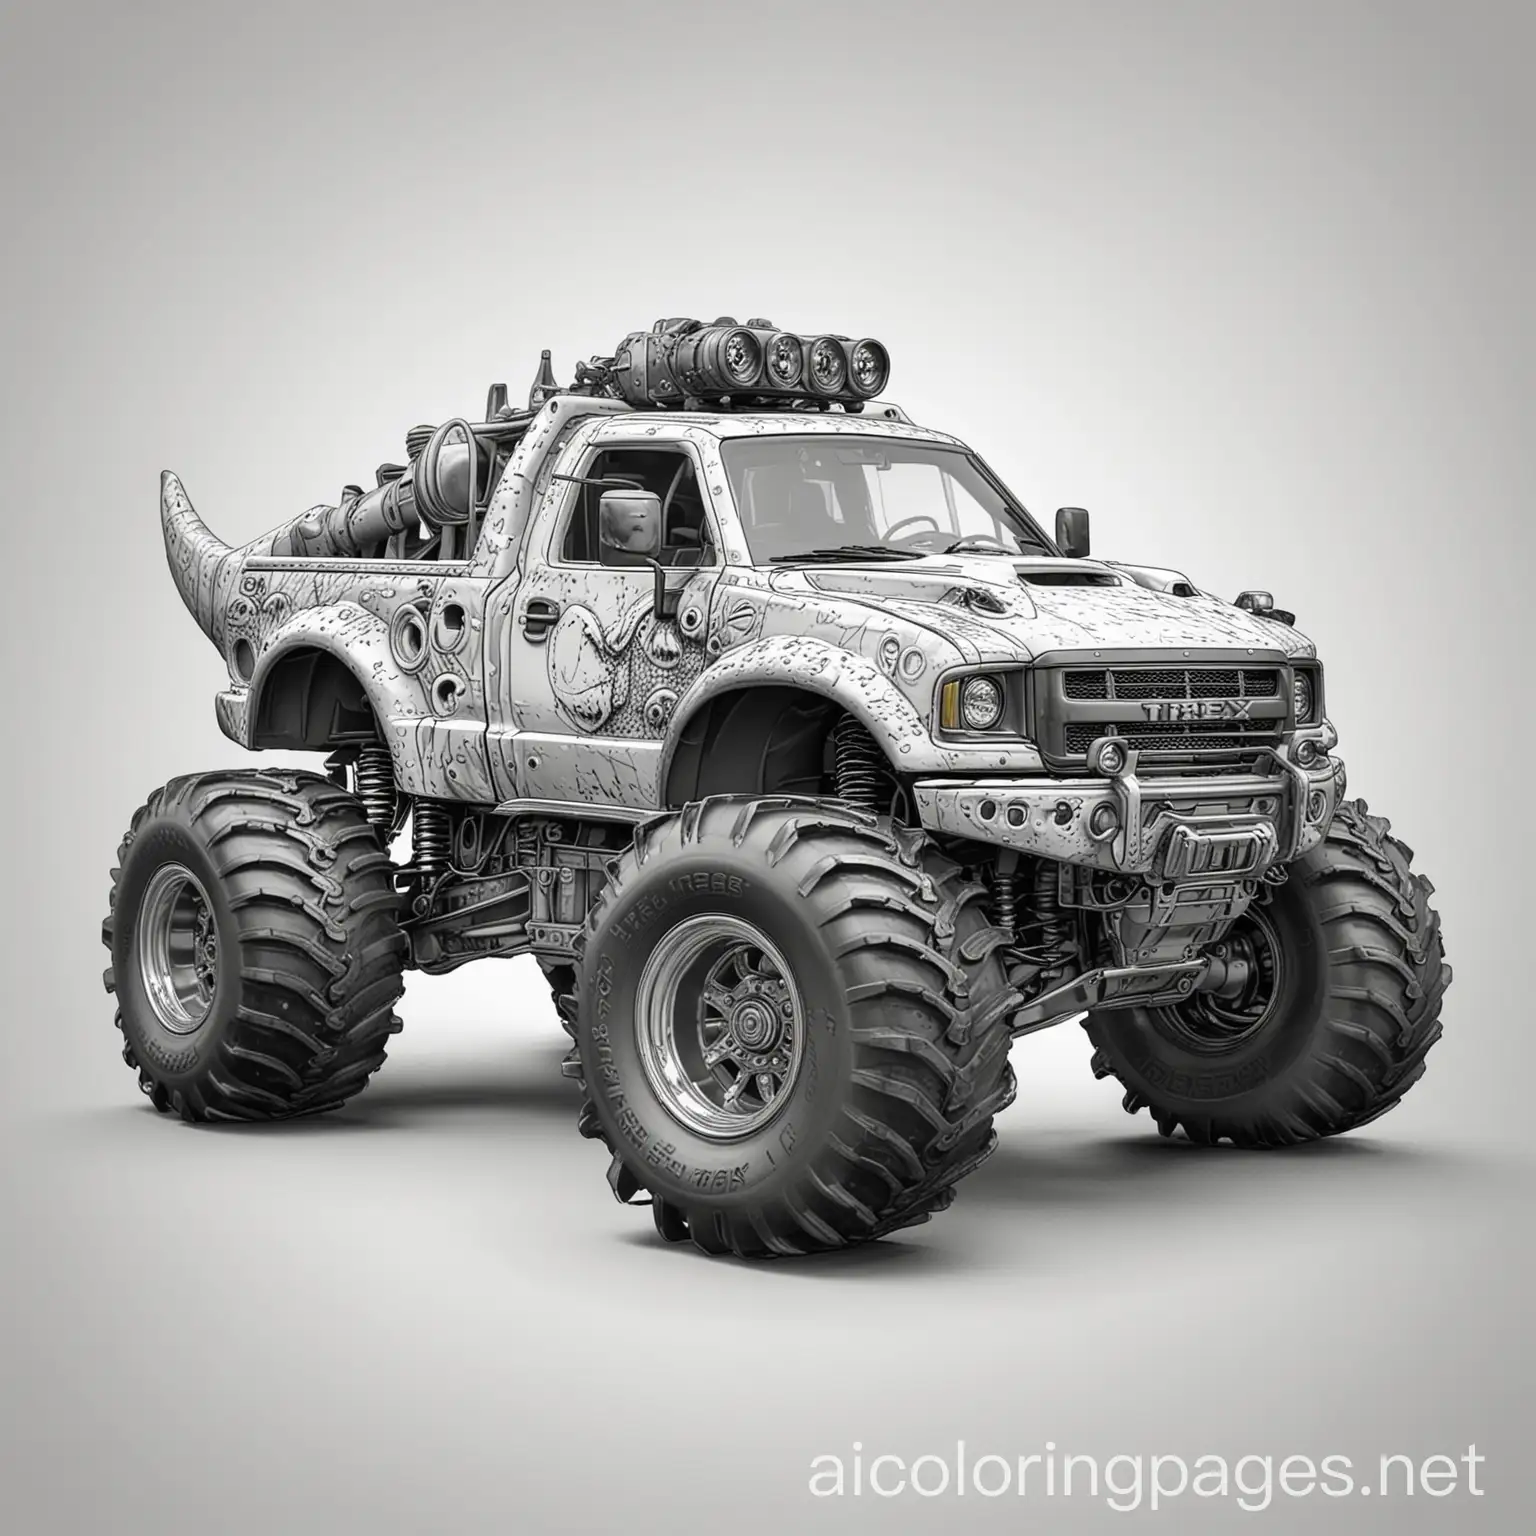 TRex-Skin-Monster-Truck-Coloring-Page-Bold-Line-Art-on-White-Background